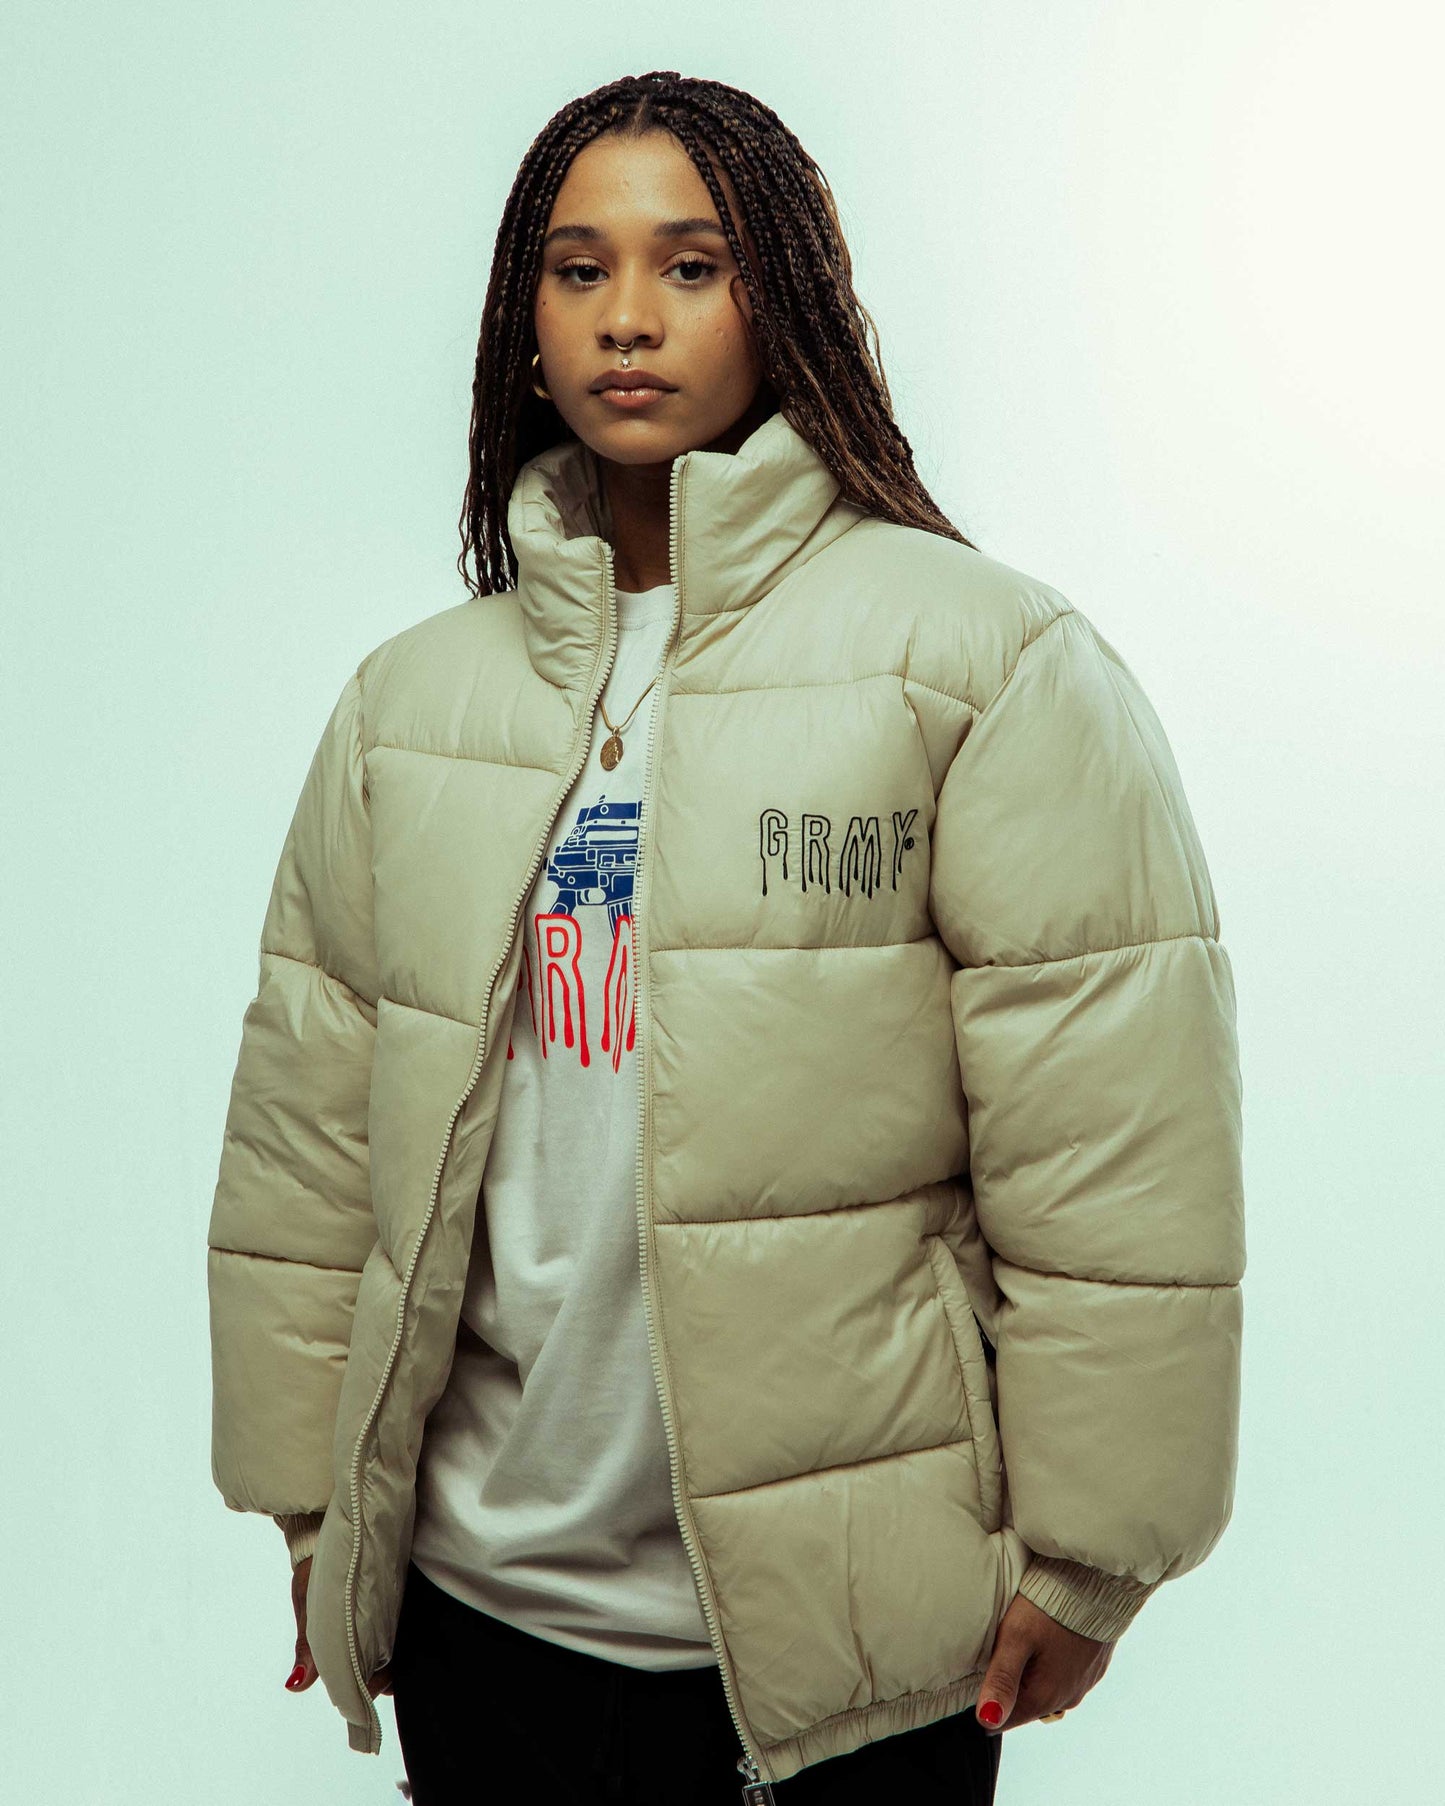 BACK AT YOU PUFFER JACKET CREAM